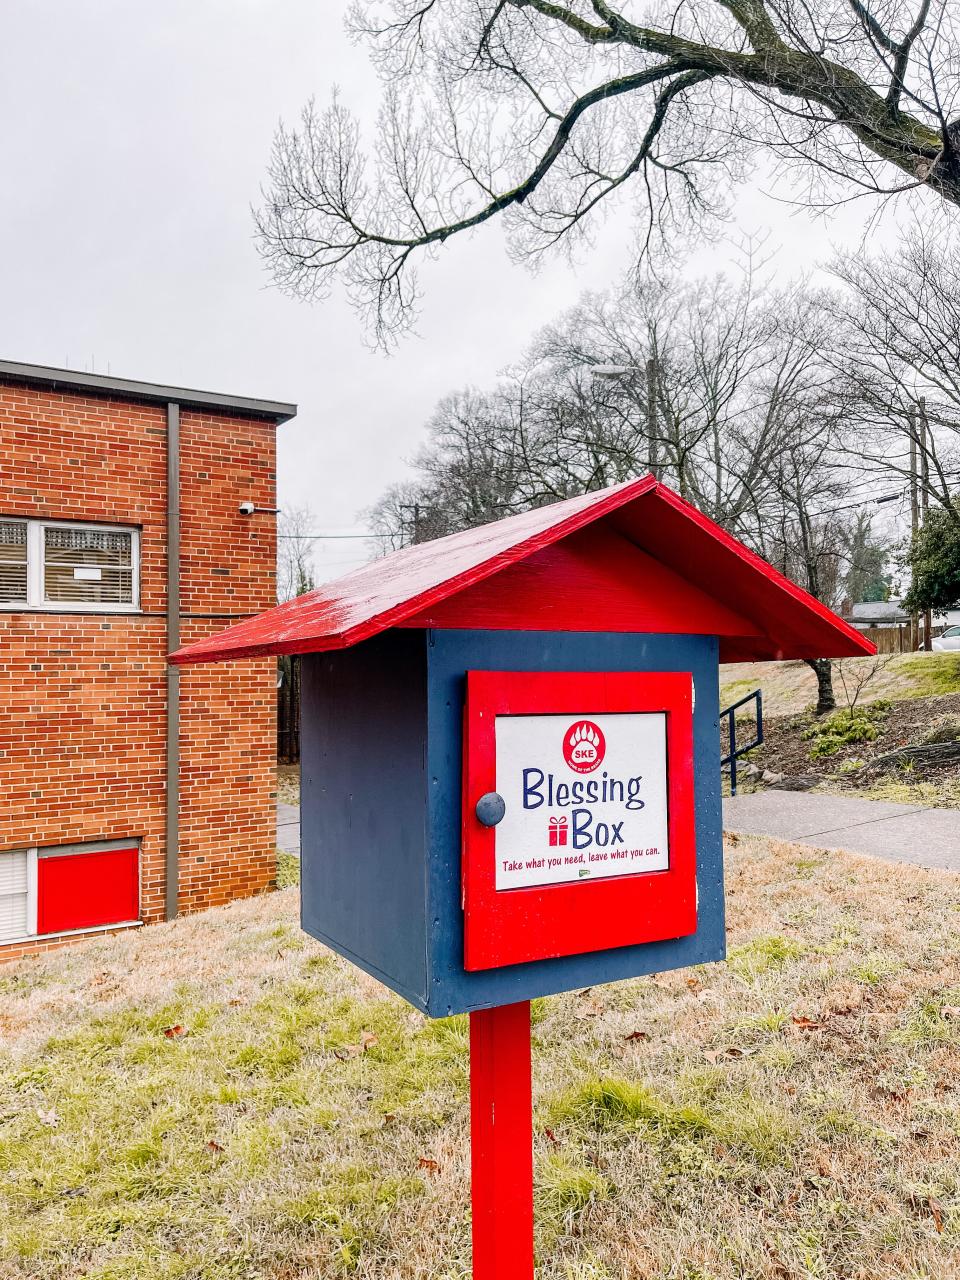 South Knoxville Elementary School’s blessing box is stocked by student council members and regularly used by members in the community. Feb. 3, 2022.